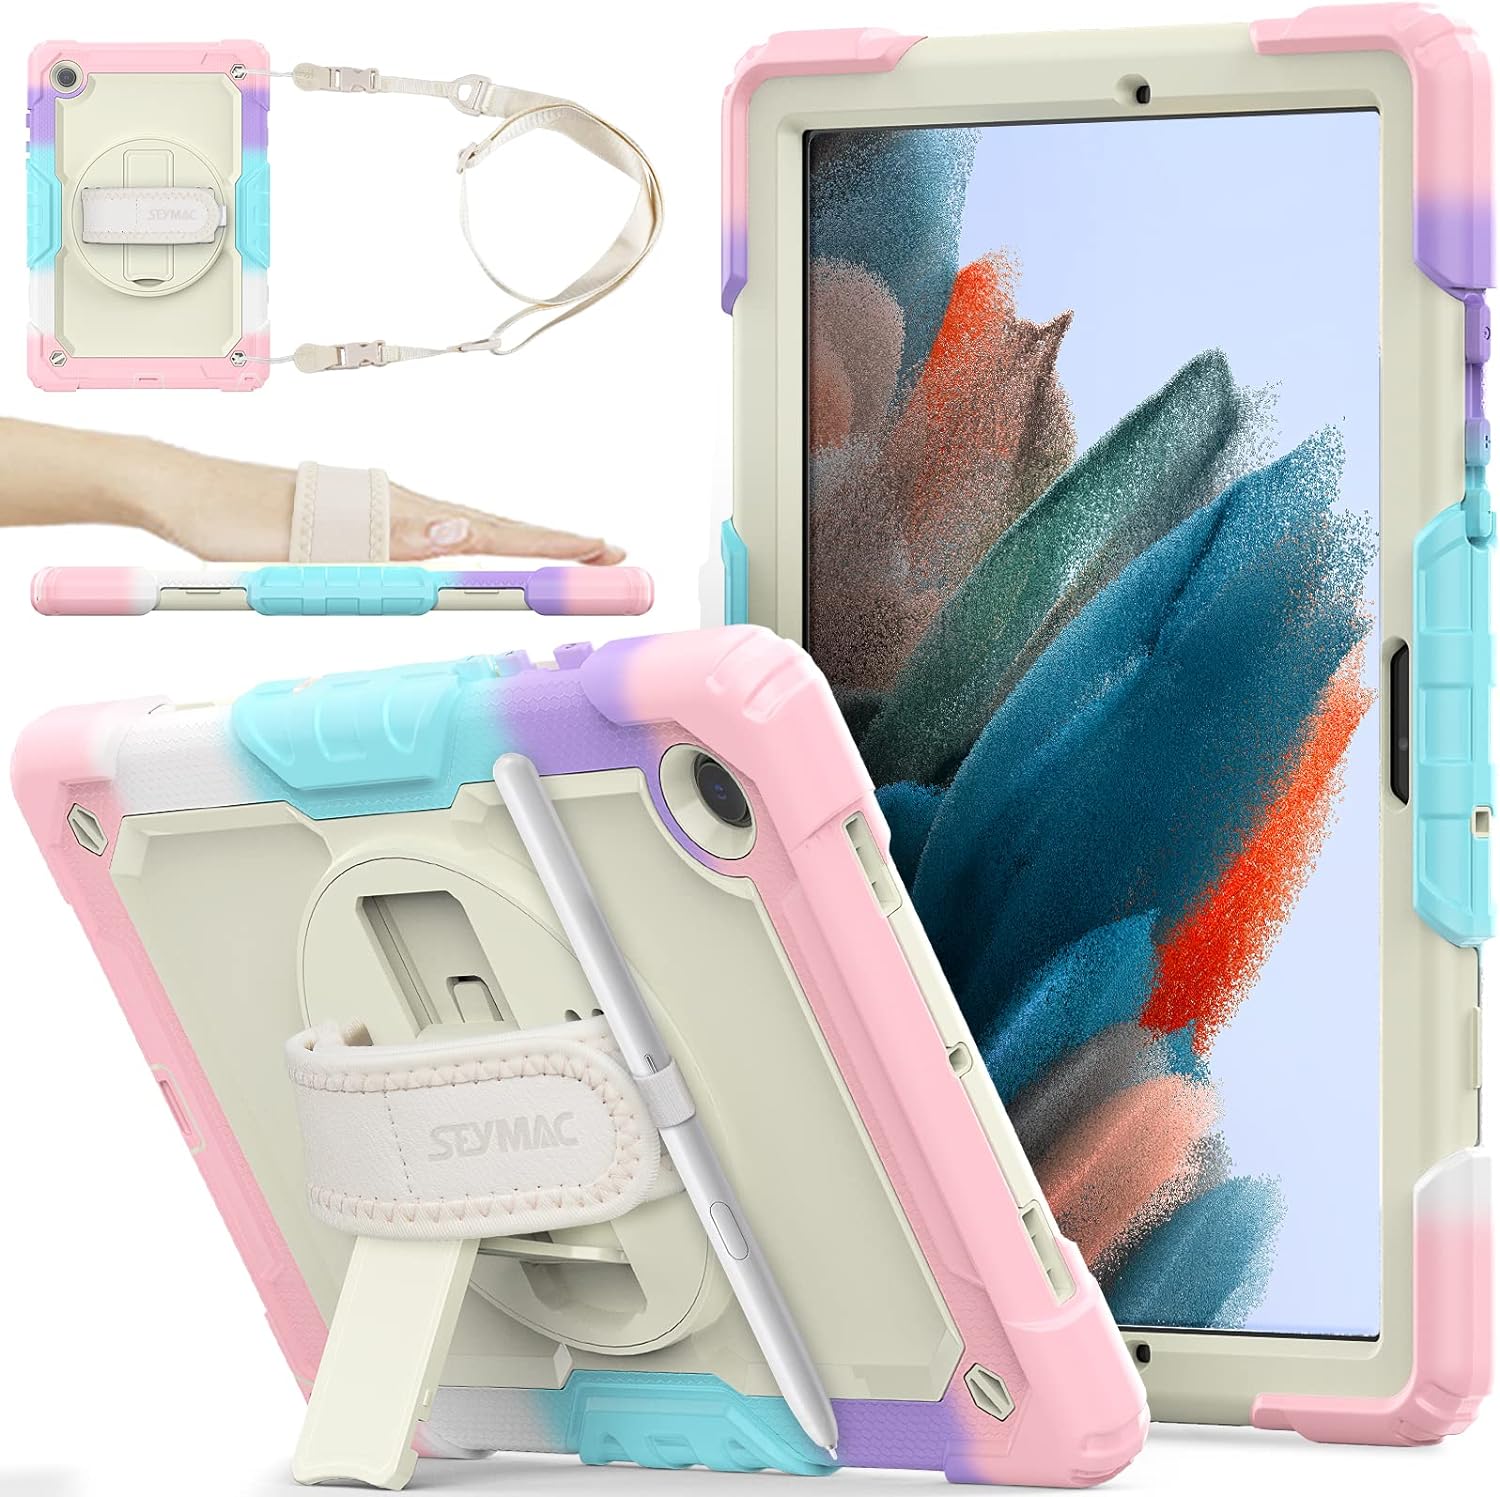 Samsung Galaxy Tab A8 Camouflage Pink Case RRP 24.99 CLEARANCE XL 19.99